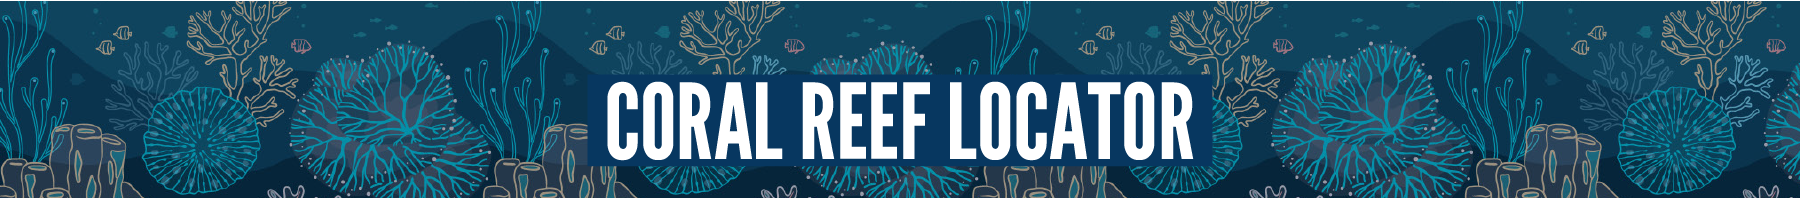 WEB Banner Coral Reef Locator